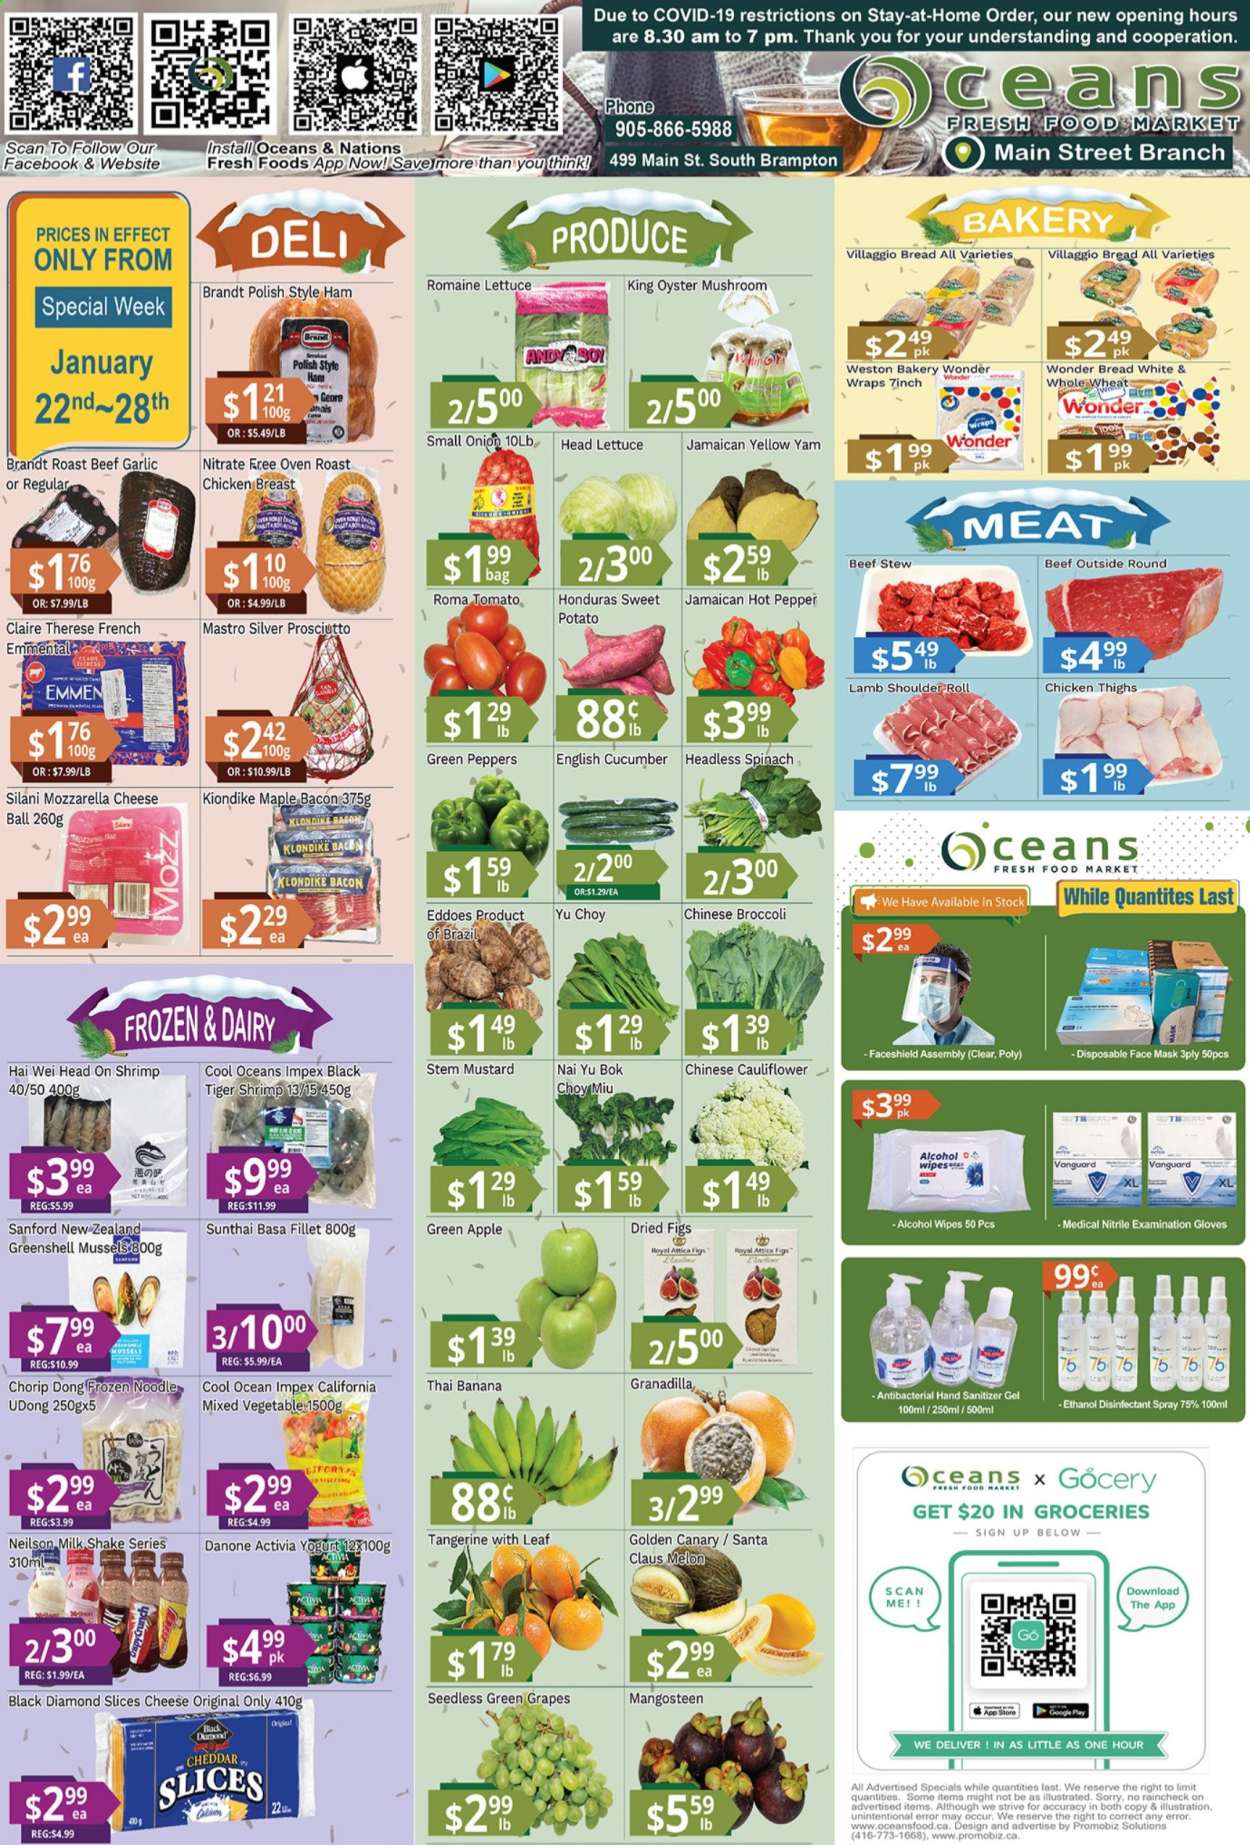 thumbnail - Oceans Flyer - January 22, 2021 - January 28, 2021 - Sales products - oyster mushrooms, mushrooms, bread, wraps, bok choy, broccoli, cauliflower, garlic, spinach, tomatoes, onion, lettuce, peppers, figs, grapes, melons, mussels, oysters, shrimps, noodles, bacon, ham, prosciutto, cheddar, cheese, yoghurt, Activia, milk, milkshake, shake, mixed vegetables, Santa, pepper, mustard, dried figs, chicken breasts, chicken thighs, chicken, beef meat, roast beef, lamb meat, lamb shoulder, wipes, face mask, antibacterial spray, hand sanitizer, polish, gloves, Danone, mozzarella, chinese broccoli, desinfection. Page 1.